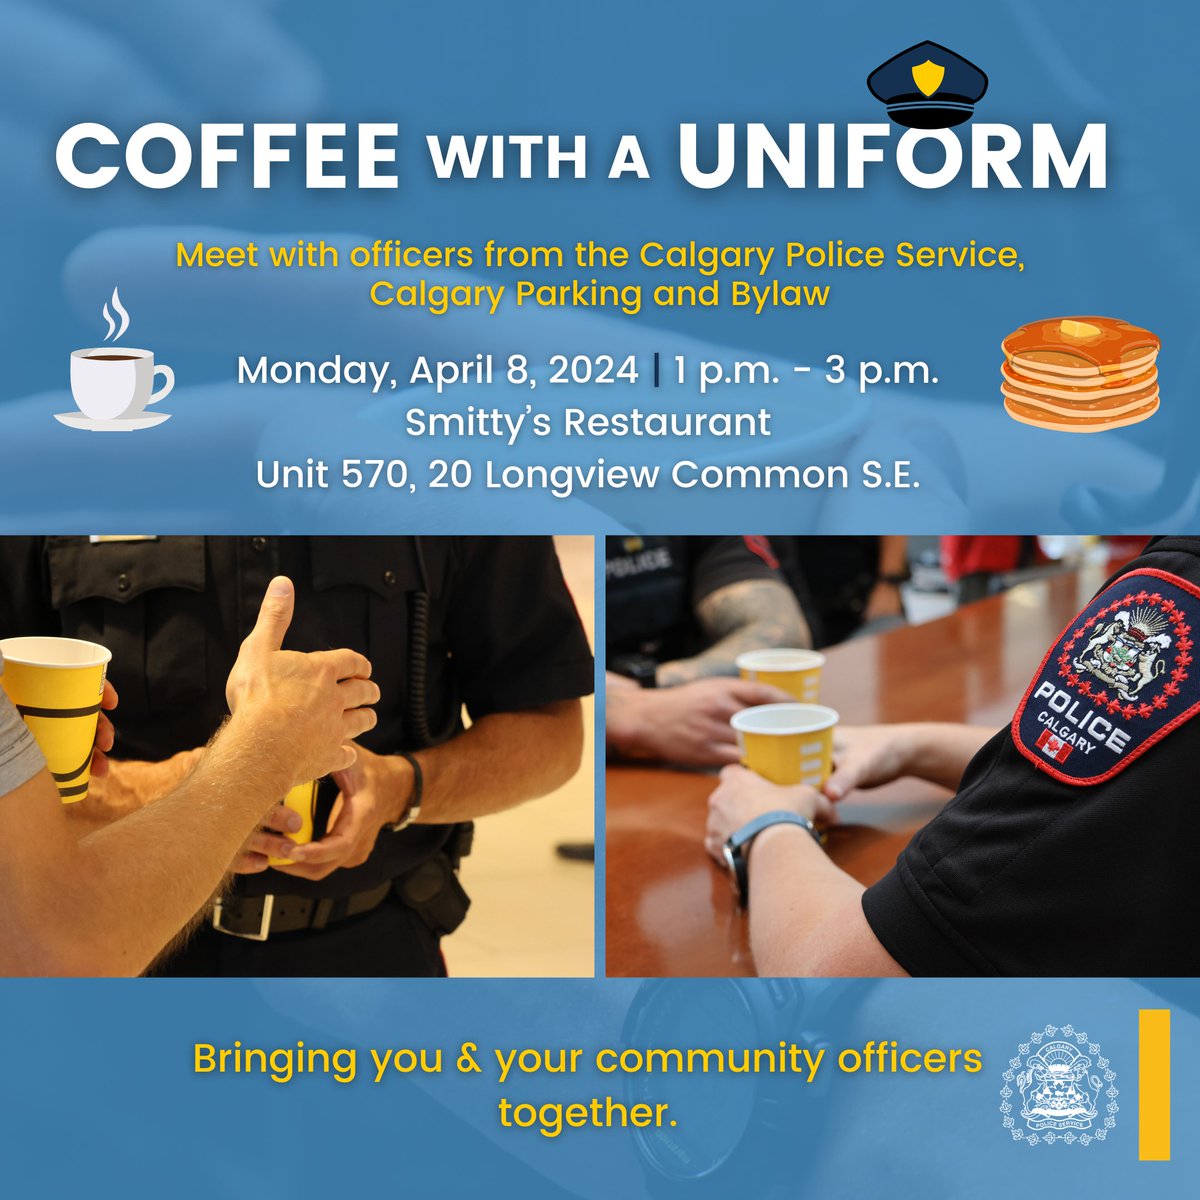 🥞 ☕ Stop by the Smitty’s Restaurant in Legacy today, from 1 p.m. to 3 p.m., for #CoffeeWithAUniform. 

Your CRO will be in attendance to answer questions & discuss safety & crime prevention topics relevant to the area over a cup of coffee & maybe some pancakes!